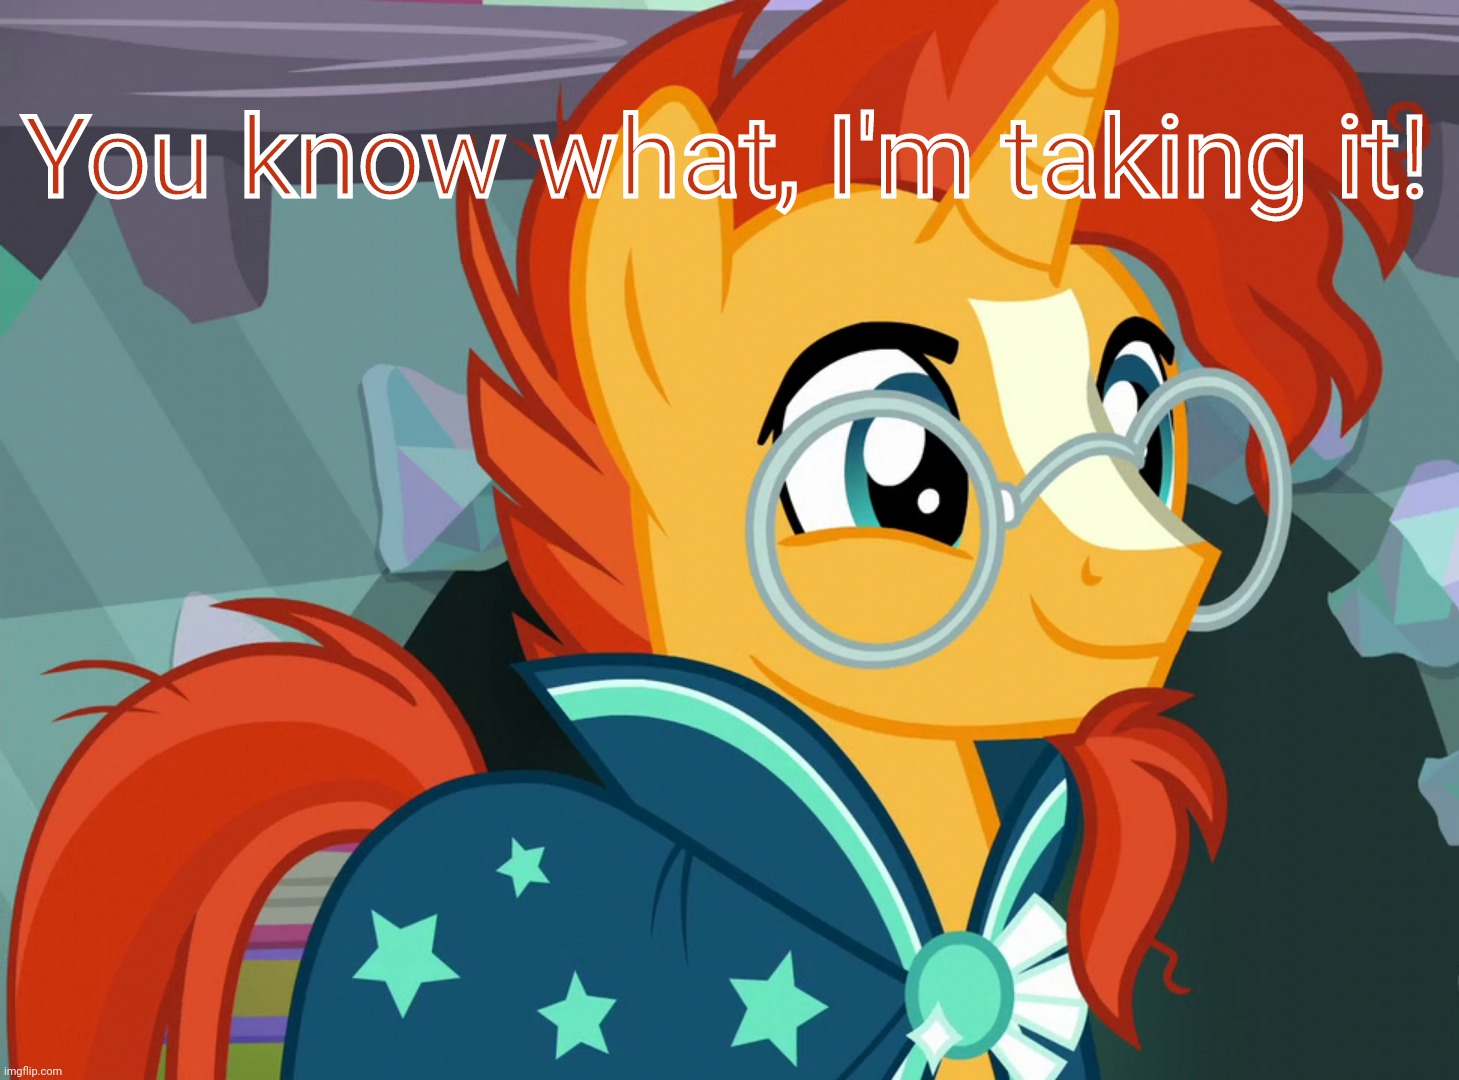 Happy Sunburst (MLP) | You know what, I'm taking it! | image tagged in happy sunburst mlp | made w/ Imgflip meme maker